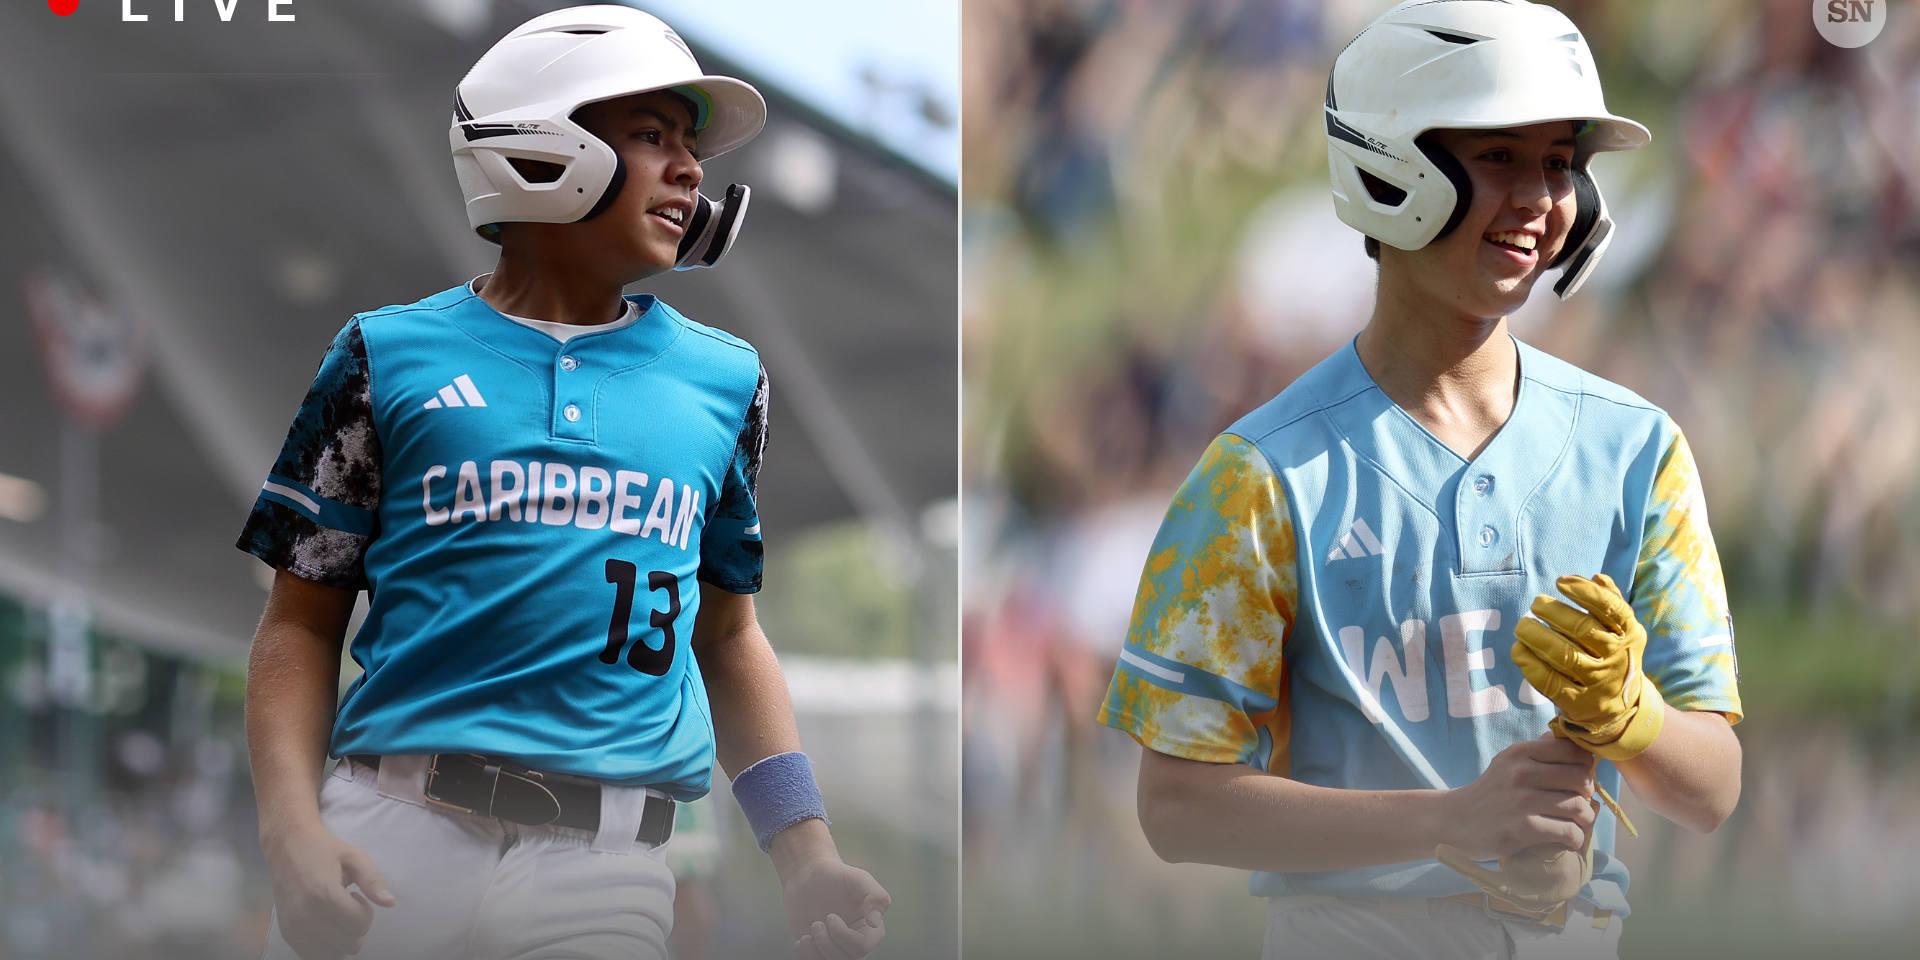 Little League World Series 2023 live score, results, highlights from California vs. Curacao championship